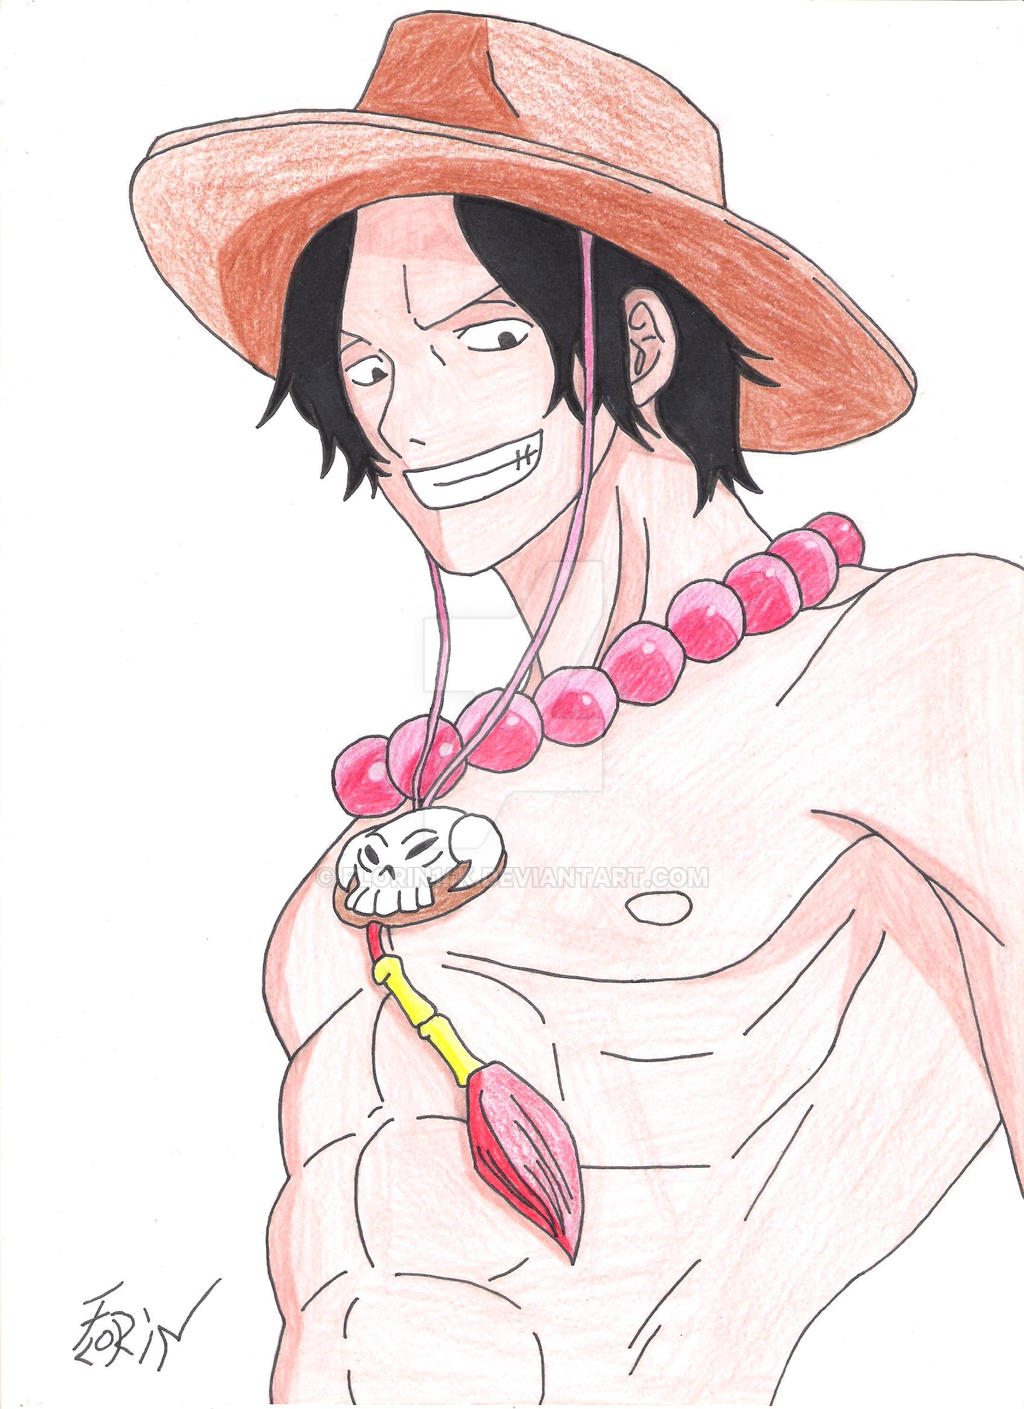 Ace One Piece ( My color ) by Florin14k on DeviantArt